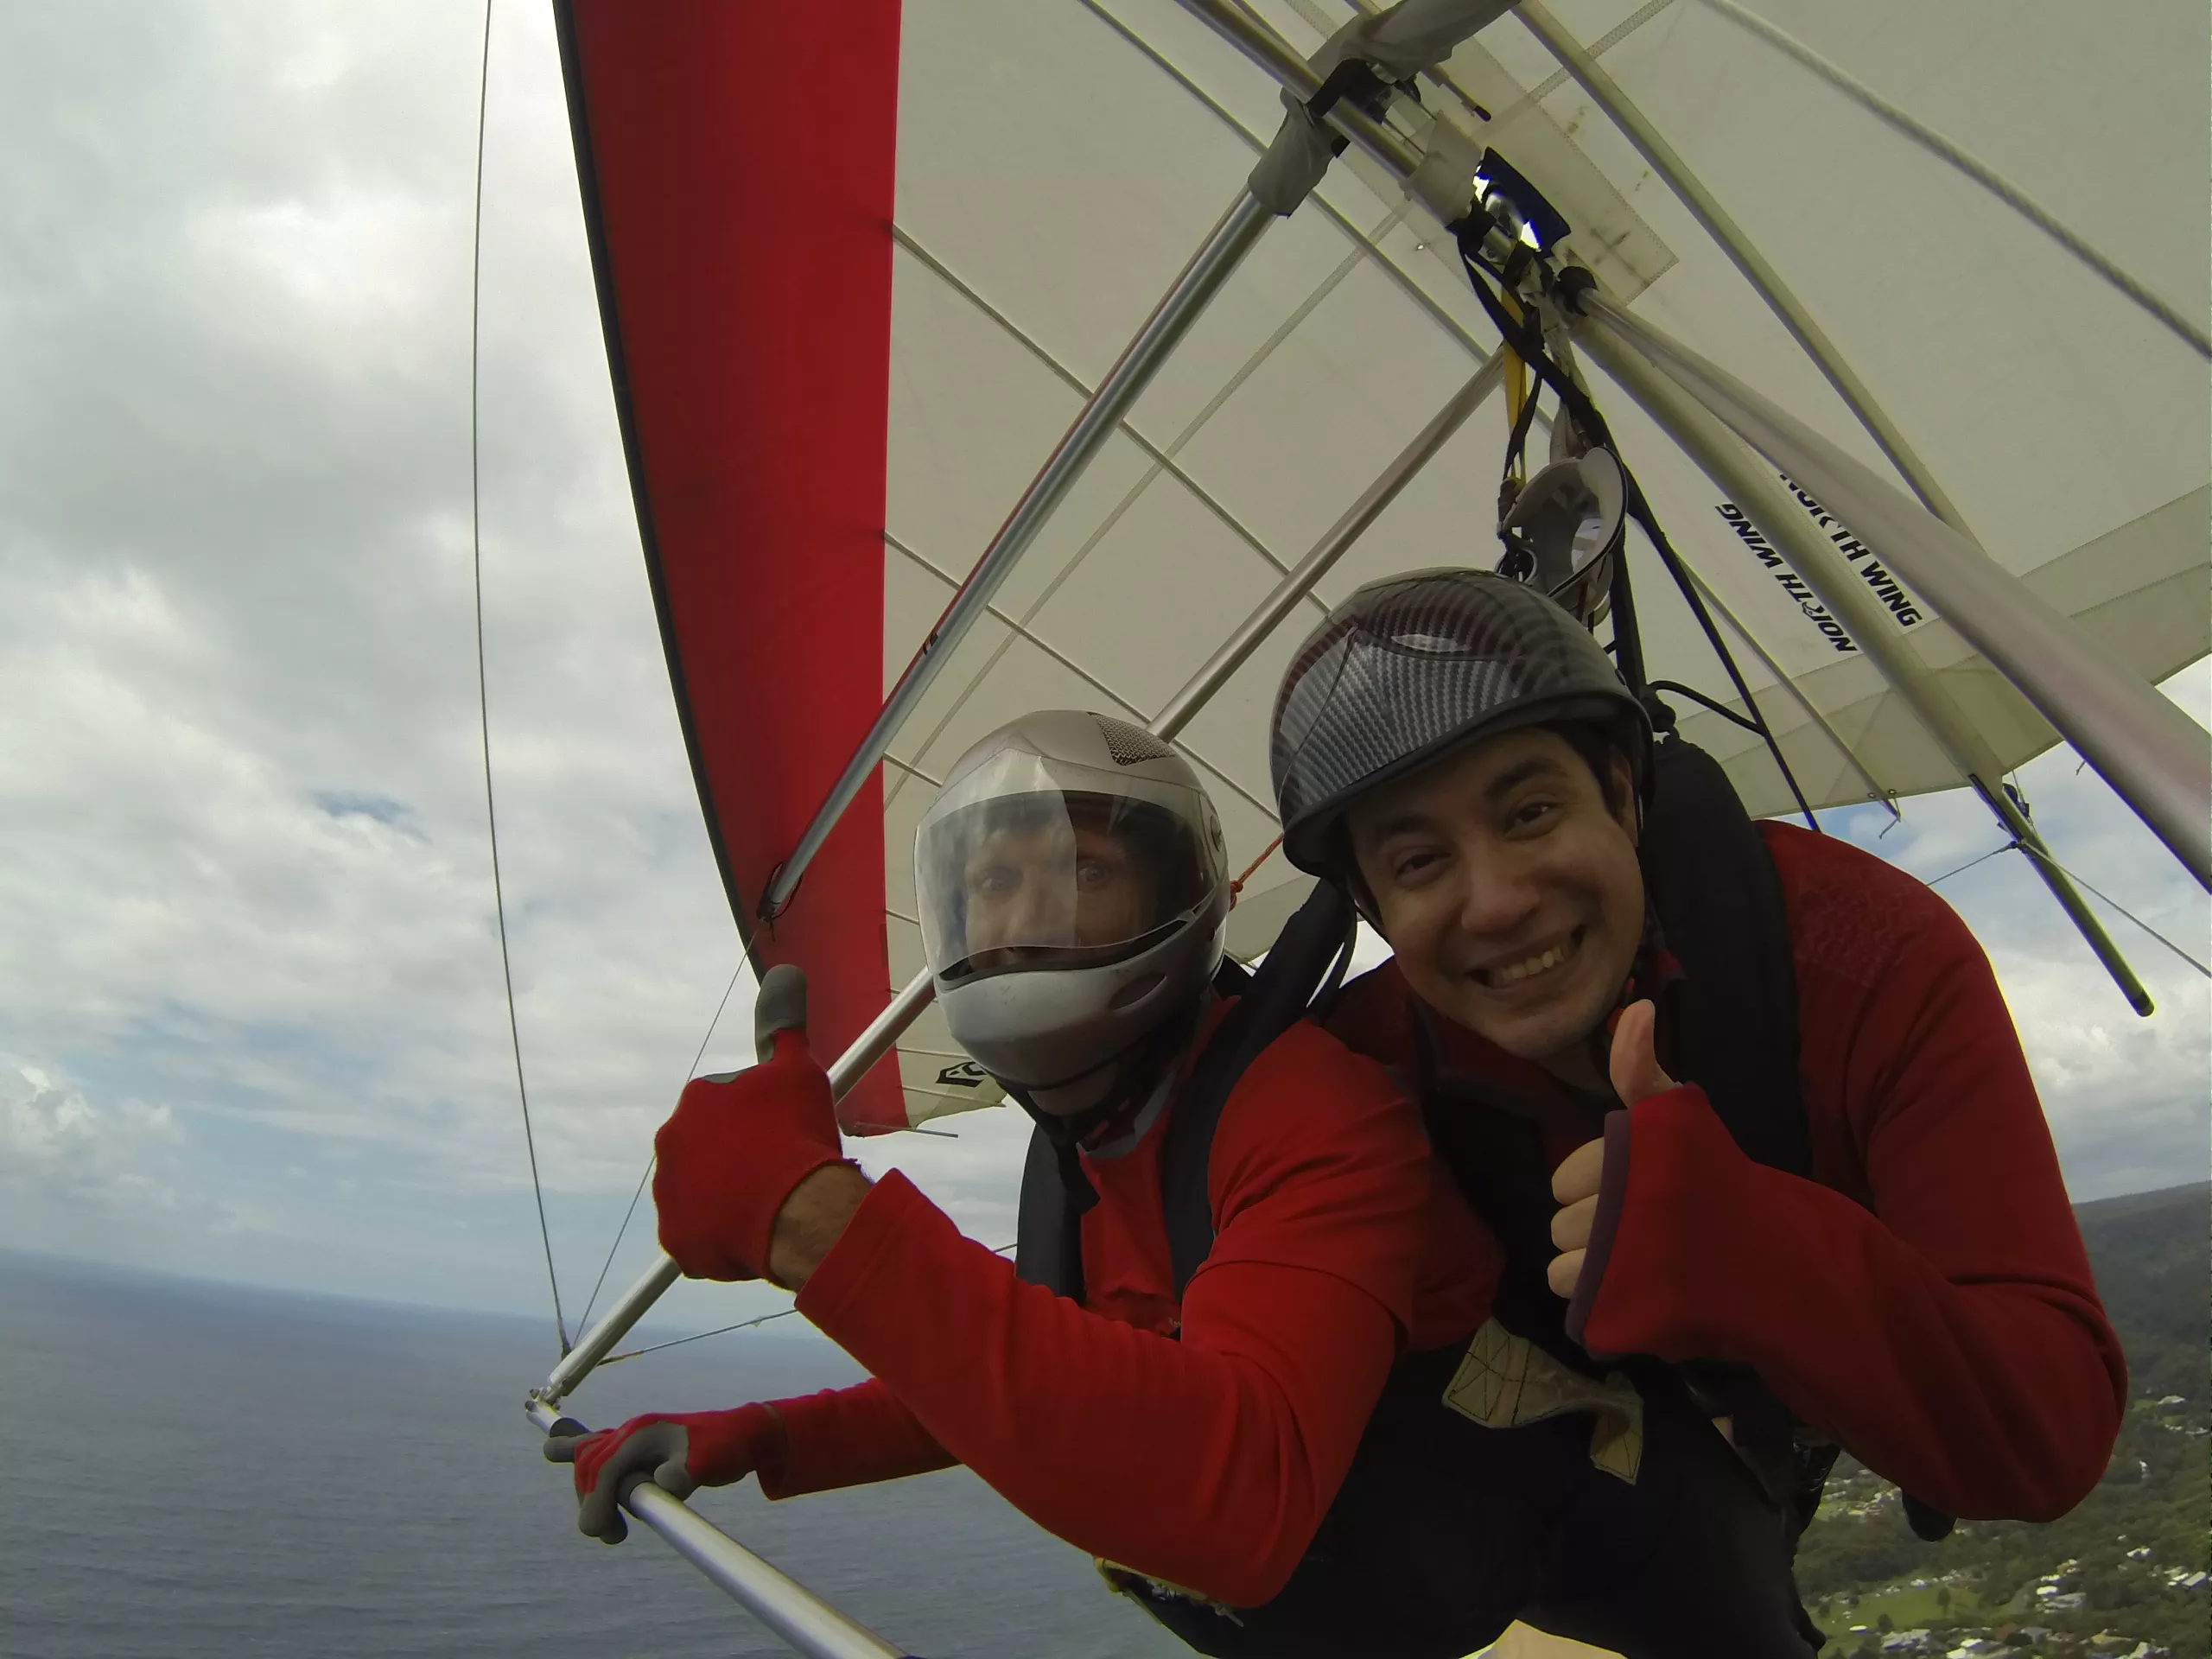 HangglideOz in Australia, Australia and Oceania | Hang Gliding - Rated 1